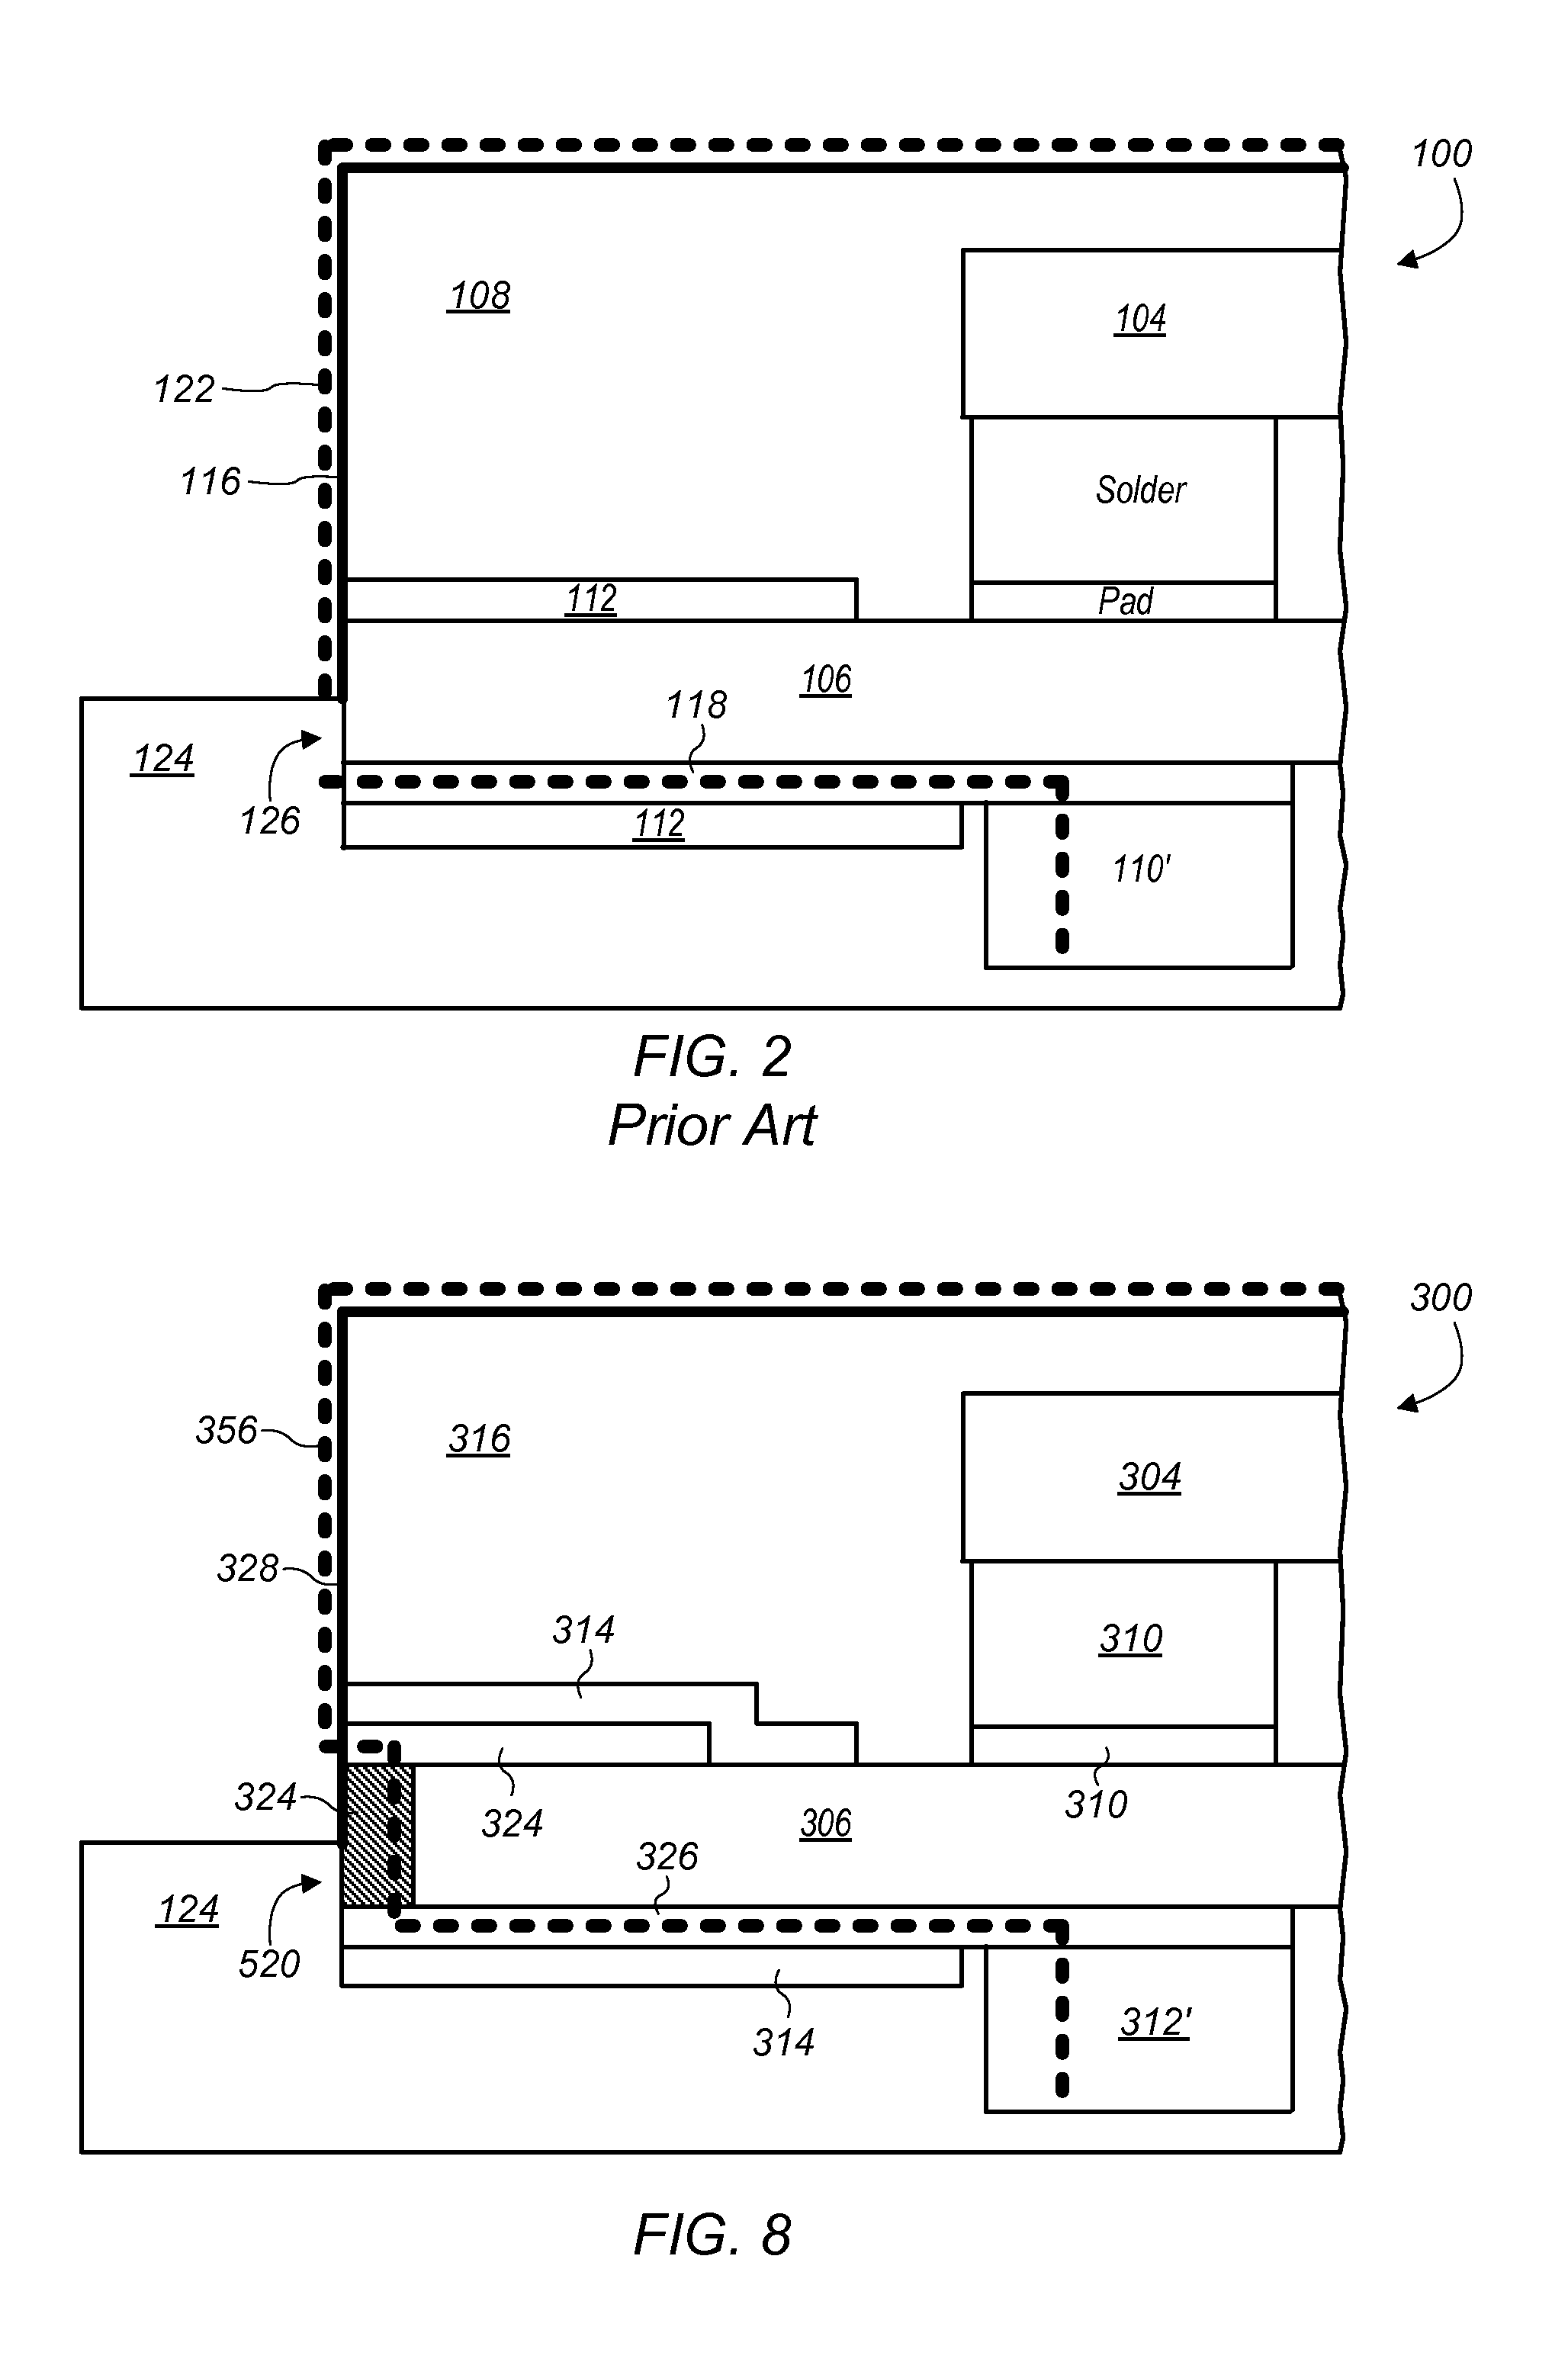 SELF SHIELDED SYSTEM IN PACKAGE (SiP) MODULES